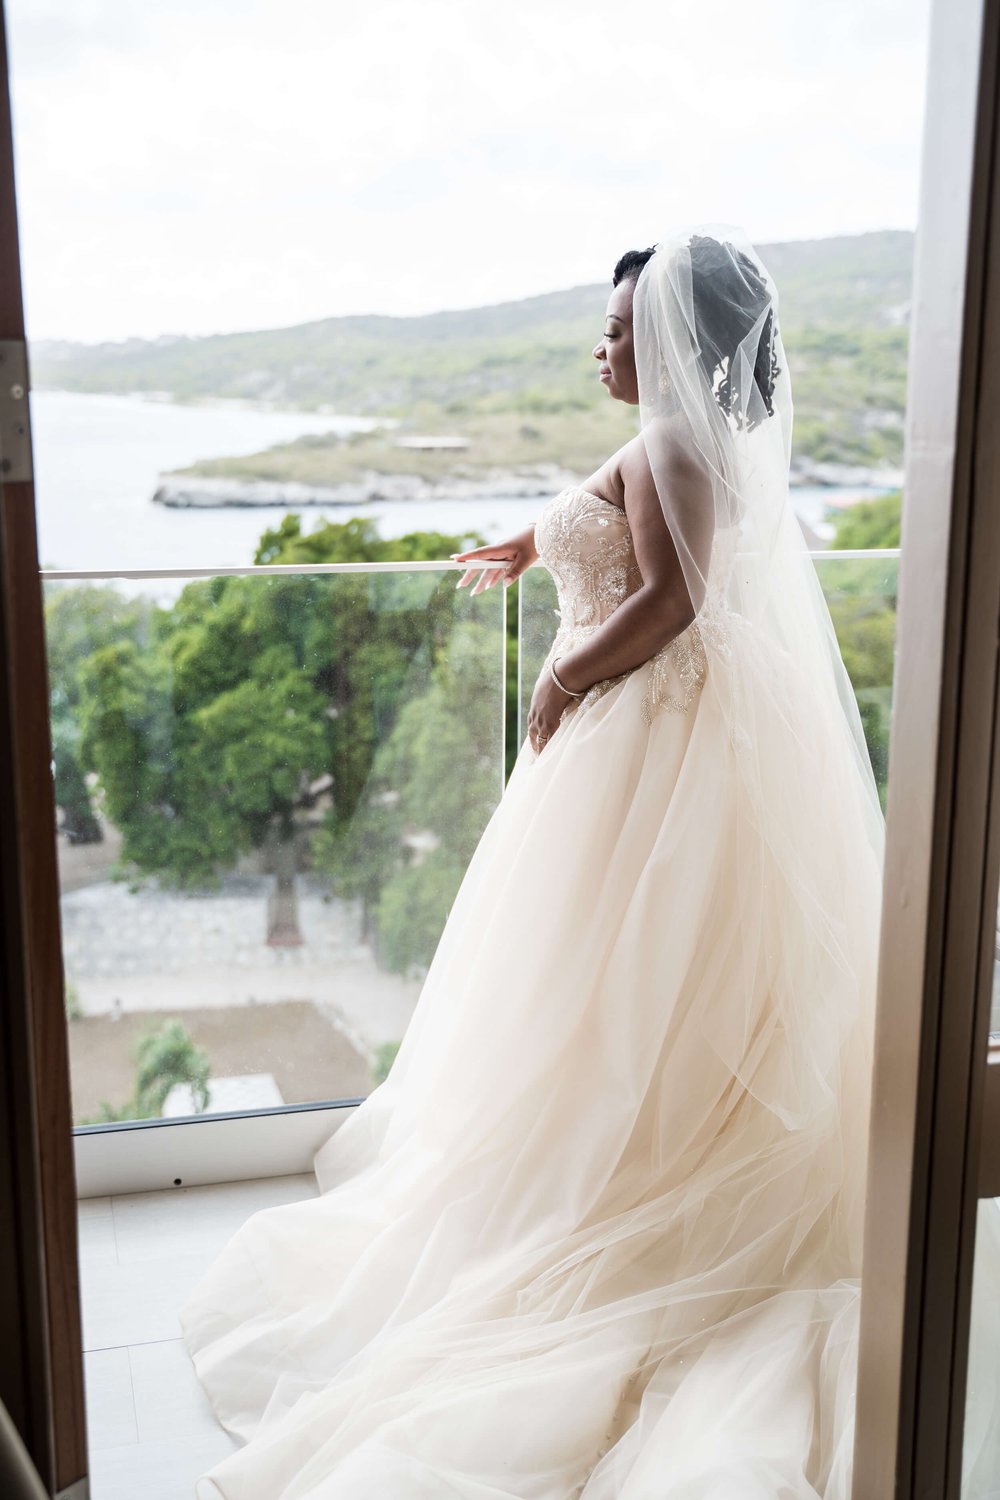 brittany-how-to-plan-a-destination-wedding-in-willemstad-curacao-dreams-curacao-resort-review-black-destination-bride-desti-tv-desti-guide-to-destination-weddings-natural-hair-gown-veil-locs-2022-8.jpg